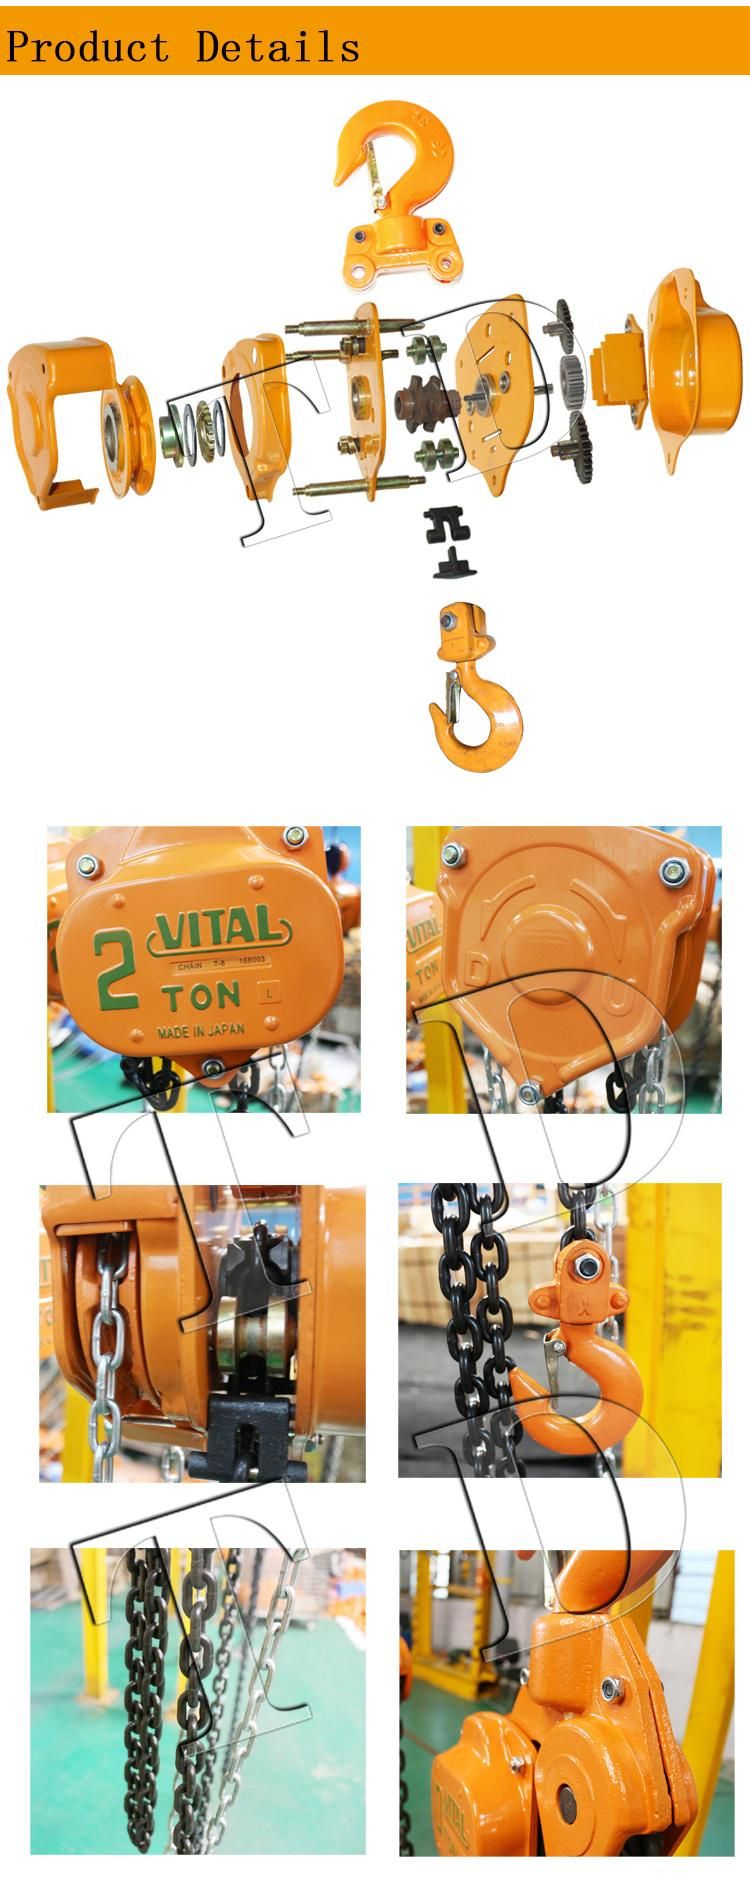 Vt Chain Block Chain Hoist Hot Selling From 1ton to 5ton